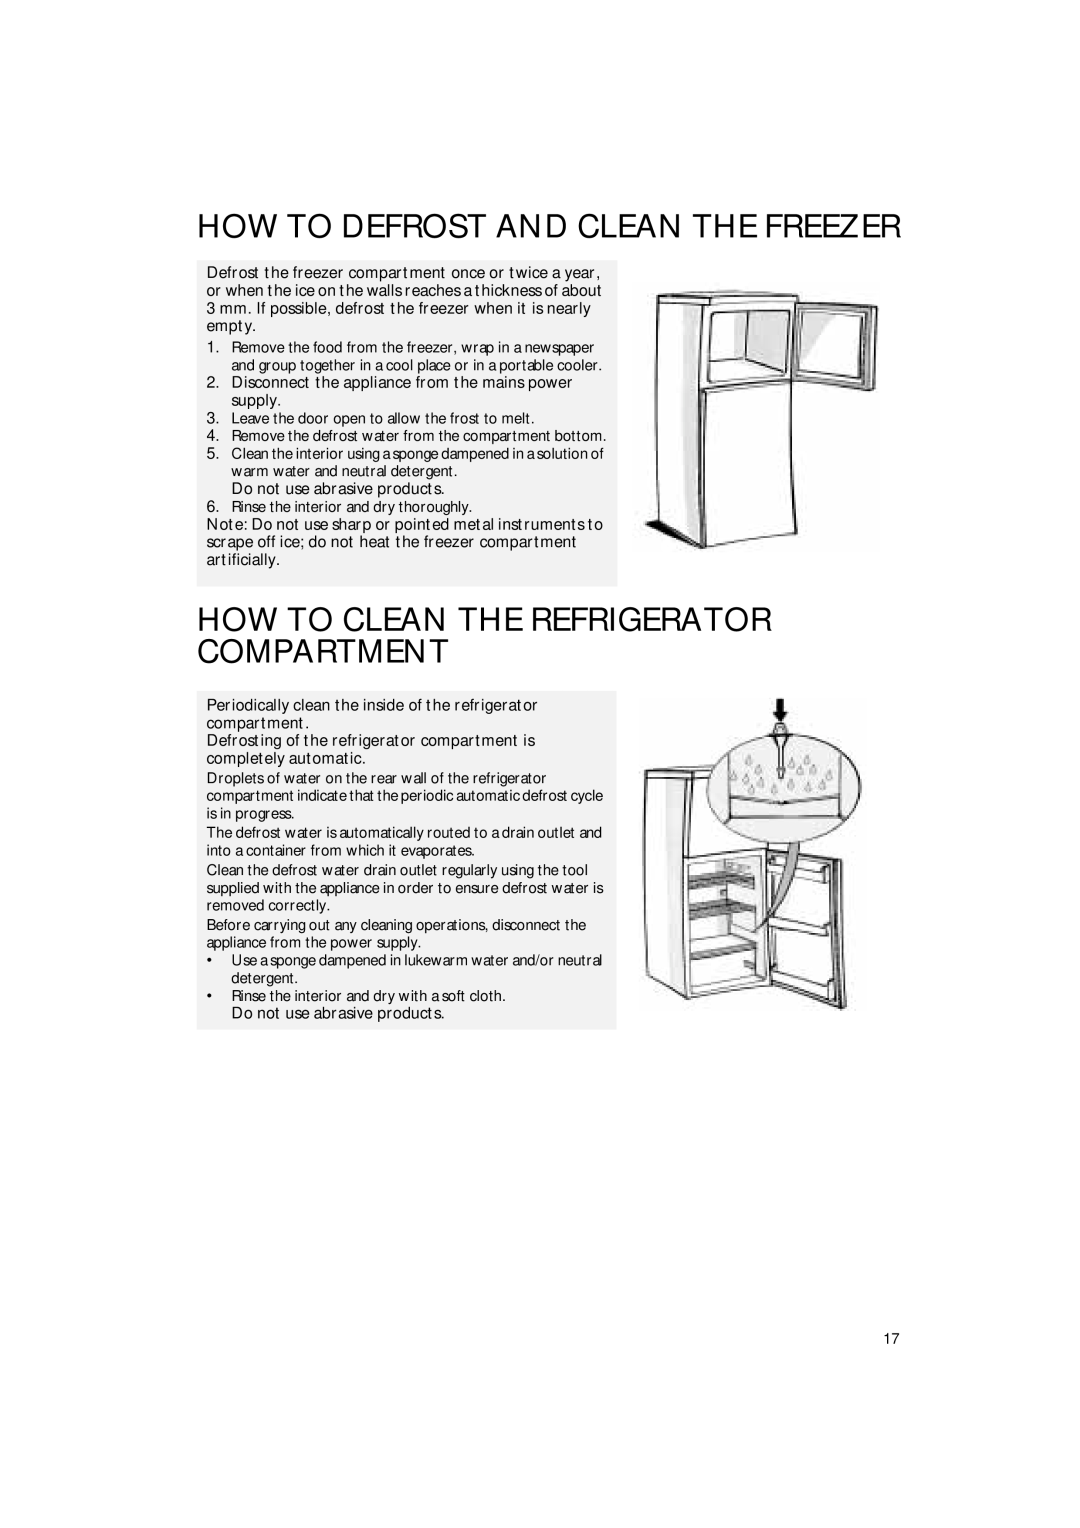 Smeg FR238APL manual How To Defrost And Clean The Freezer, How To Clean The Refrigerator Compartment 